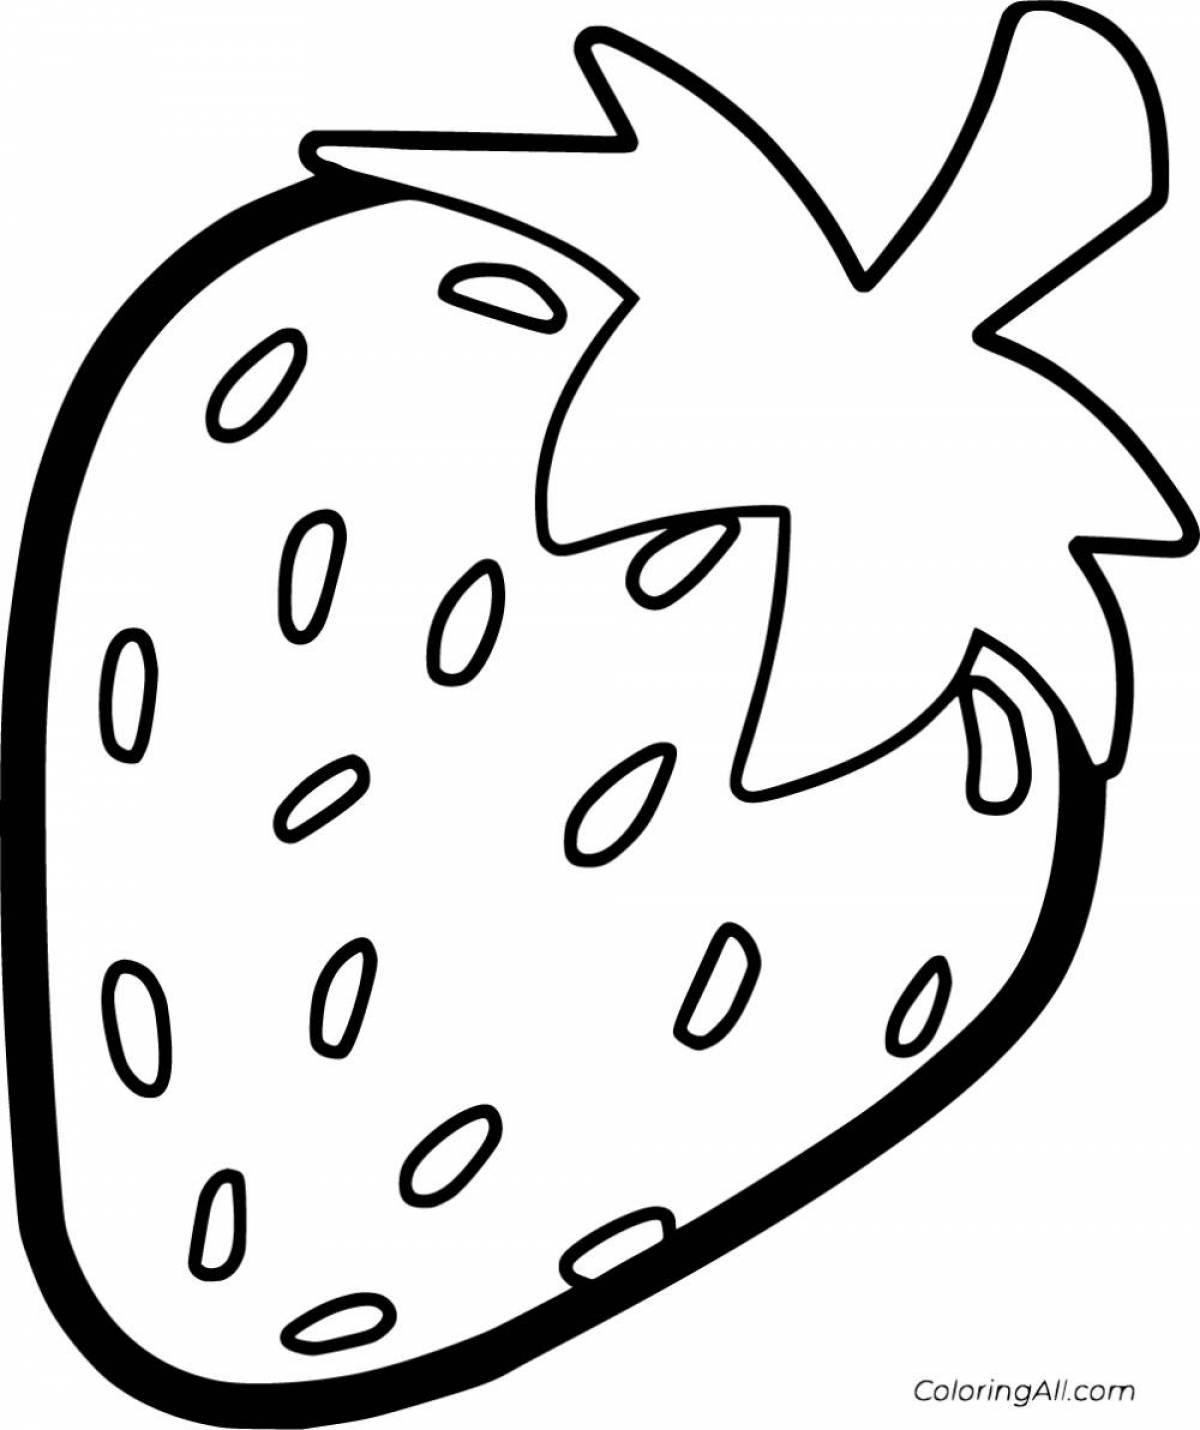 Animated strawberry coloring page for kids